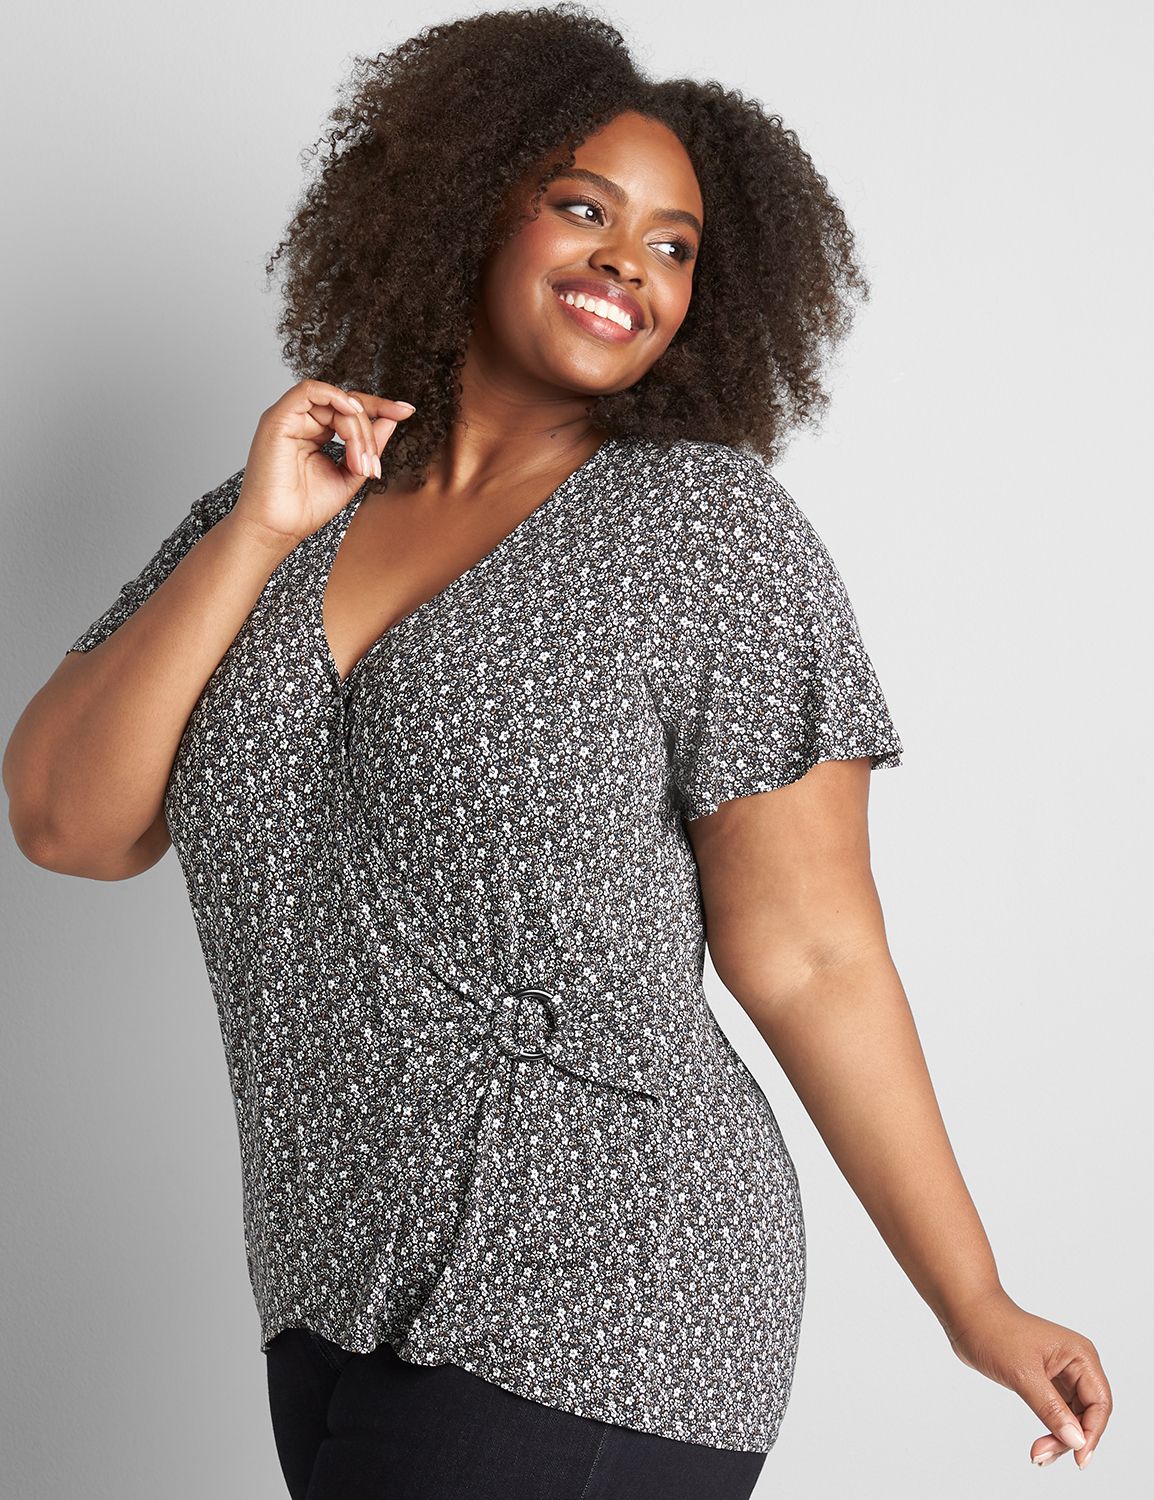 afsked Edition Effektivt Clearance Plus Size Tops & Tees - On Sale Today | Lane Bryant